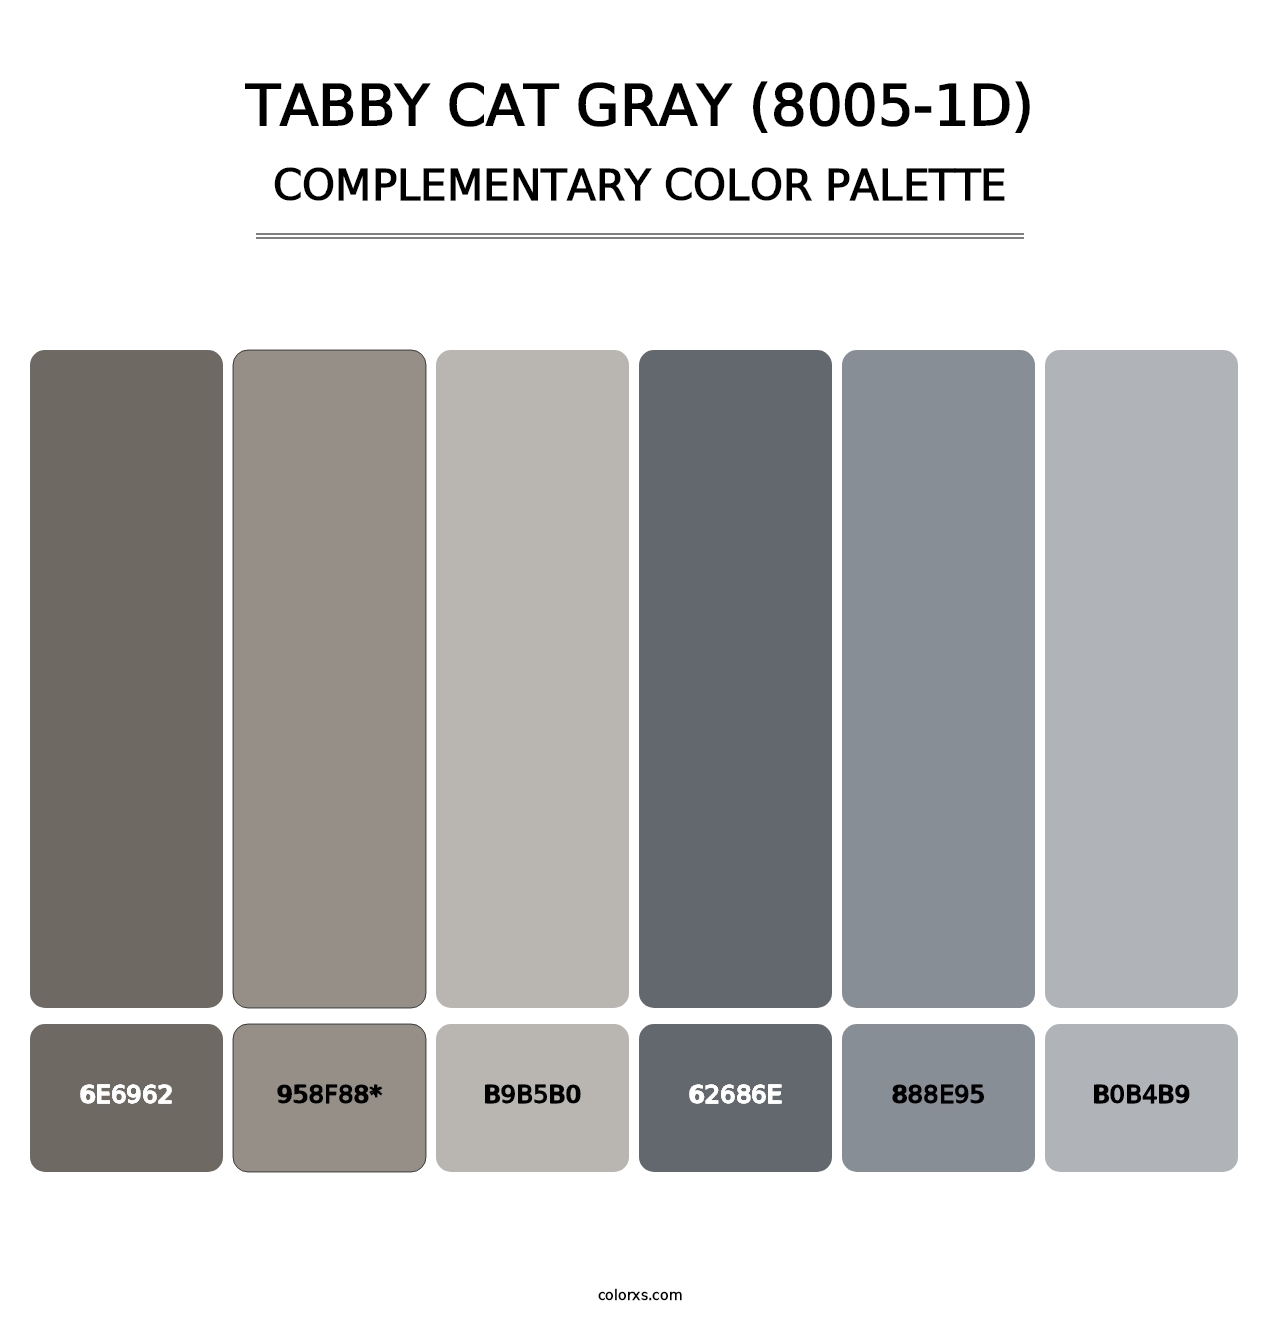 Tabby Cat Gray (8005-1D) - Complementary Color Palette